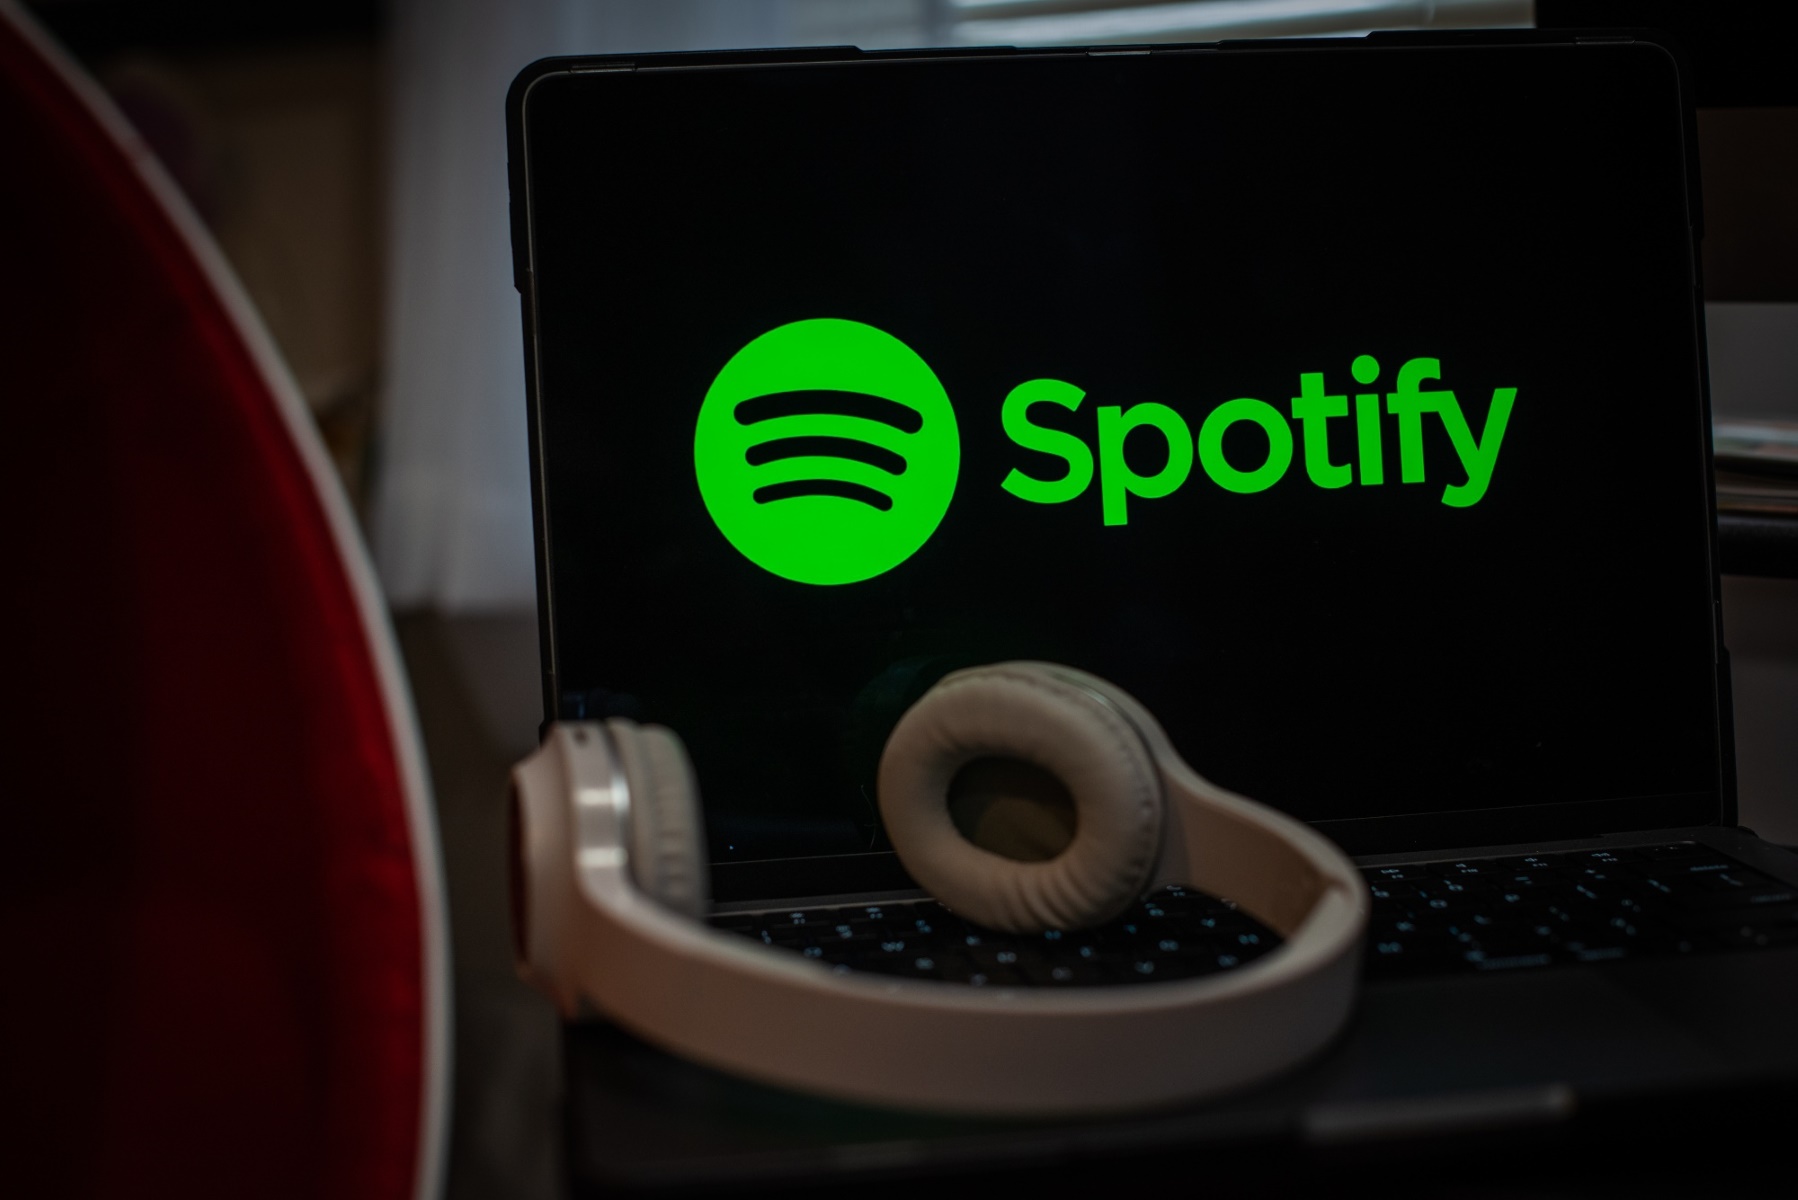 How To Update Firewall To Allow Spotify